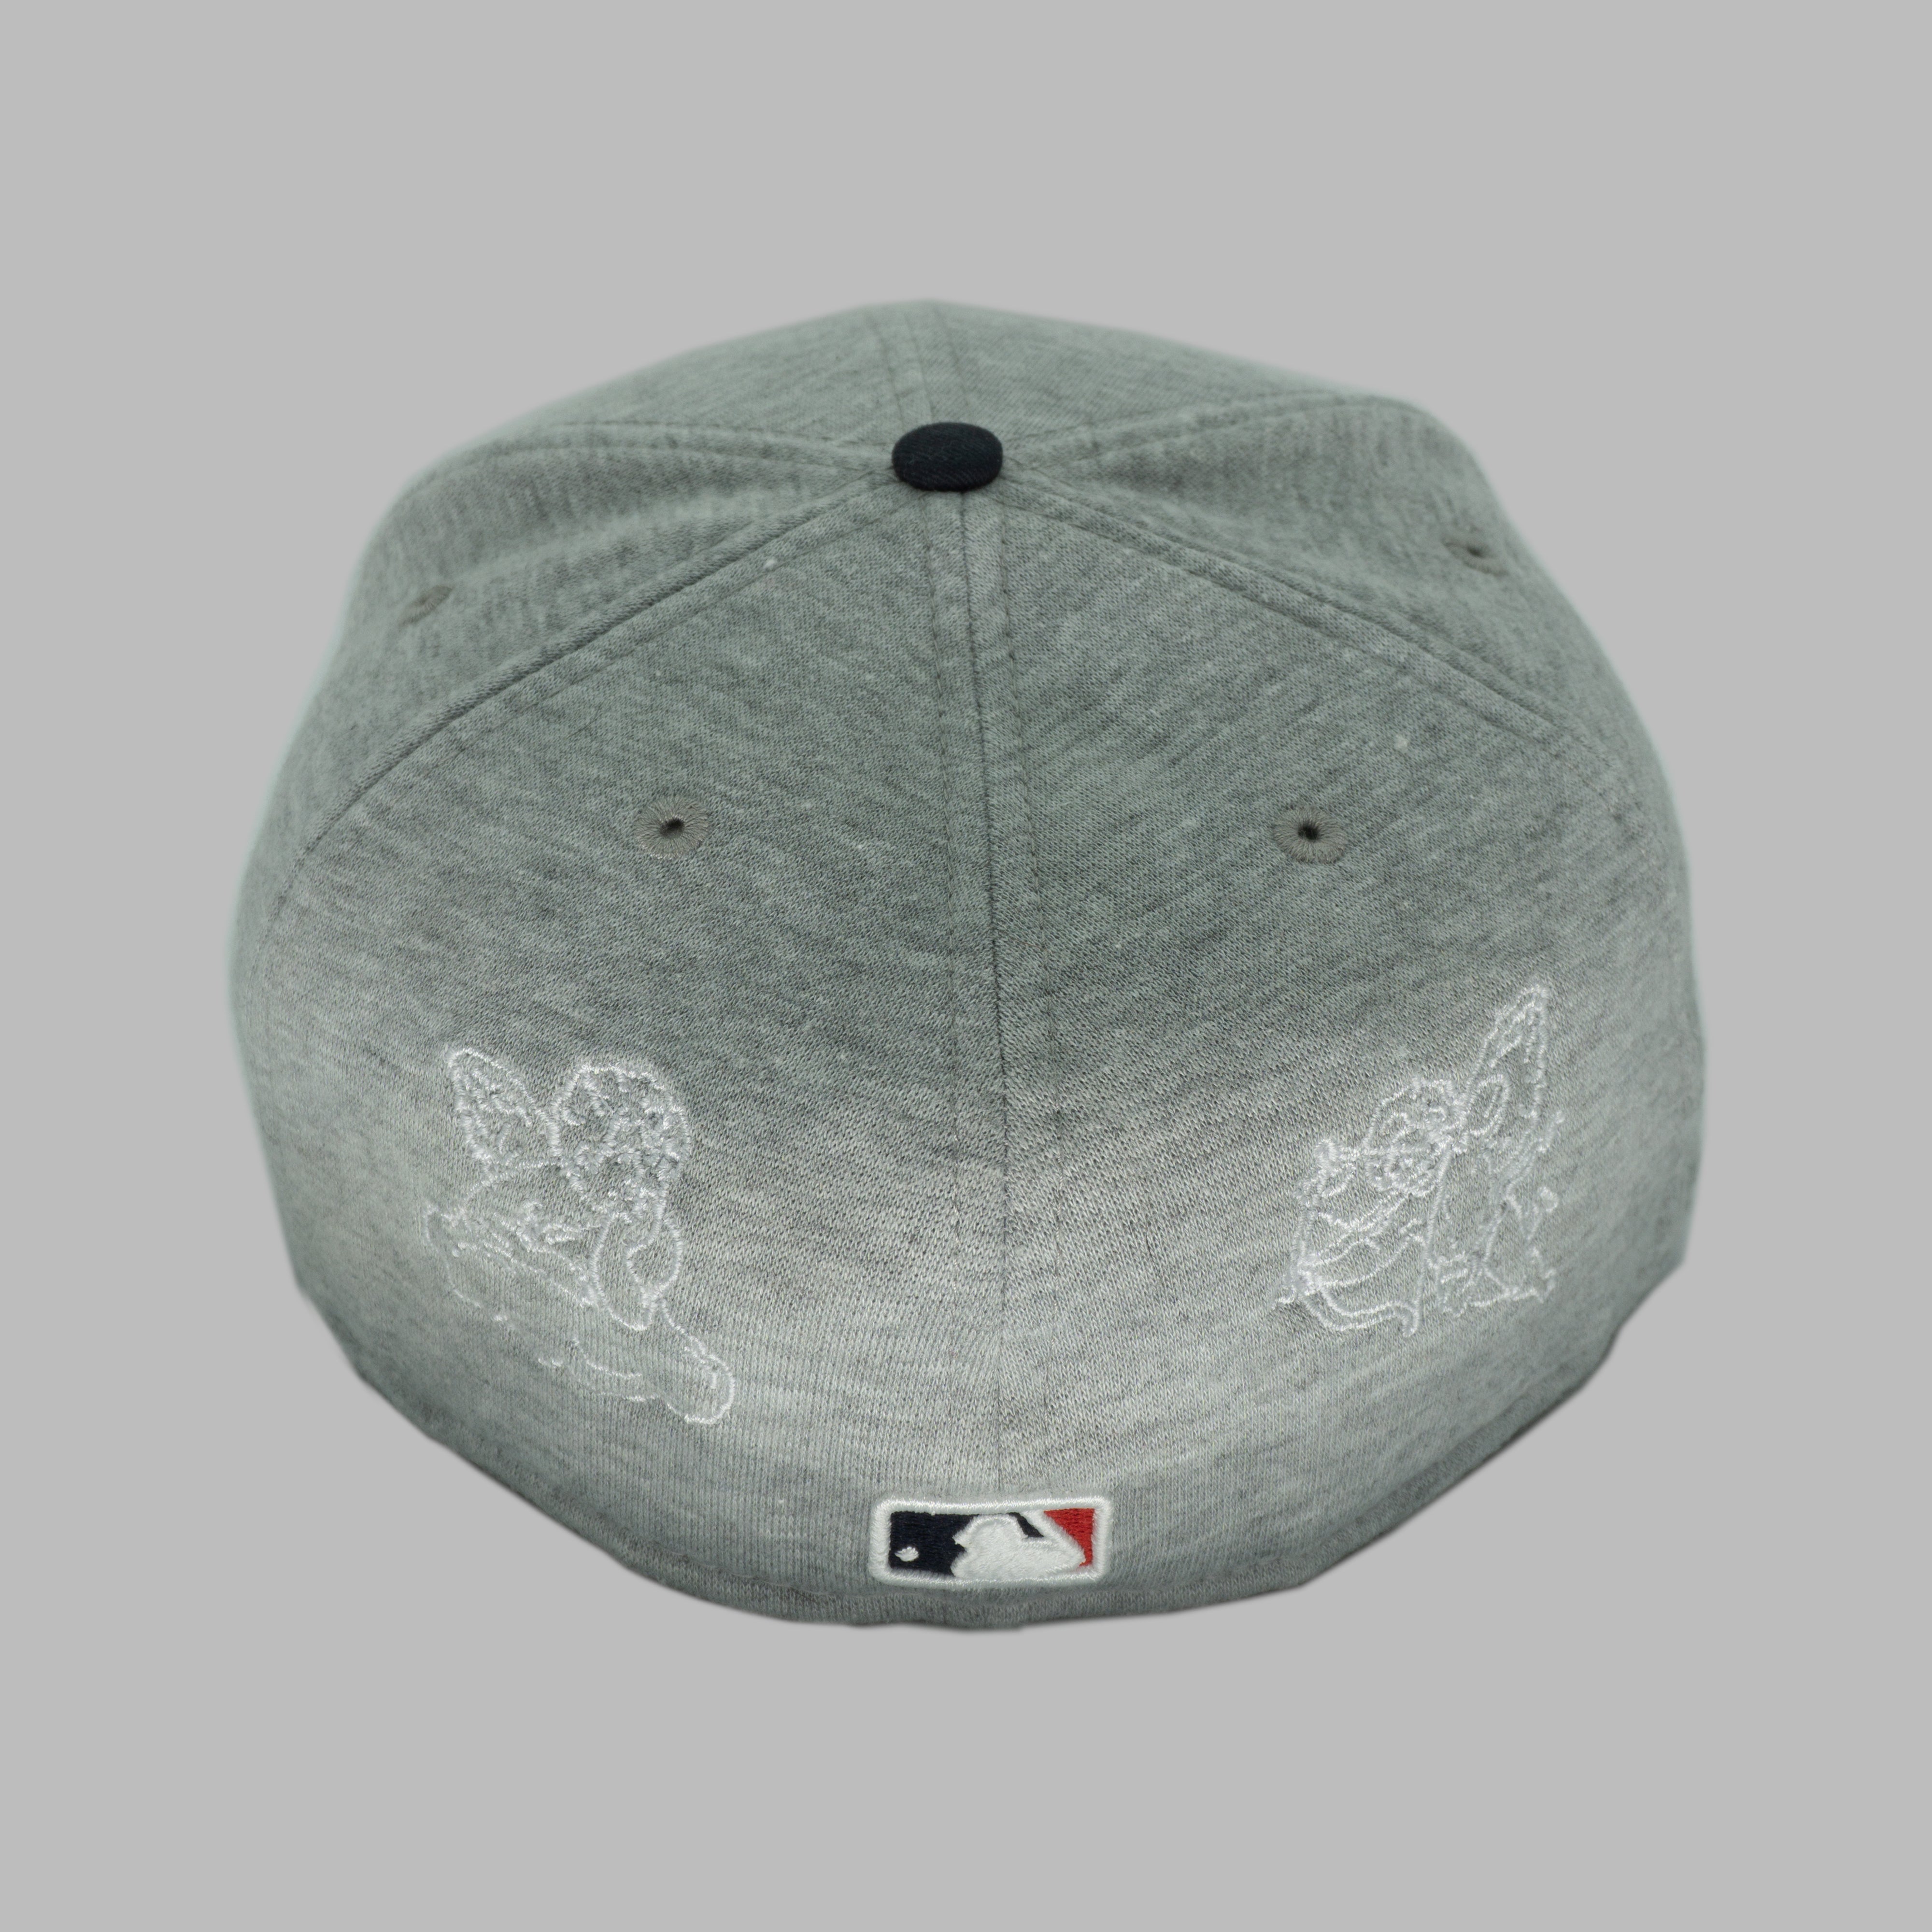 GREY HOLY FITTED (size 7 3/8)